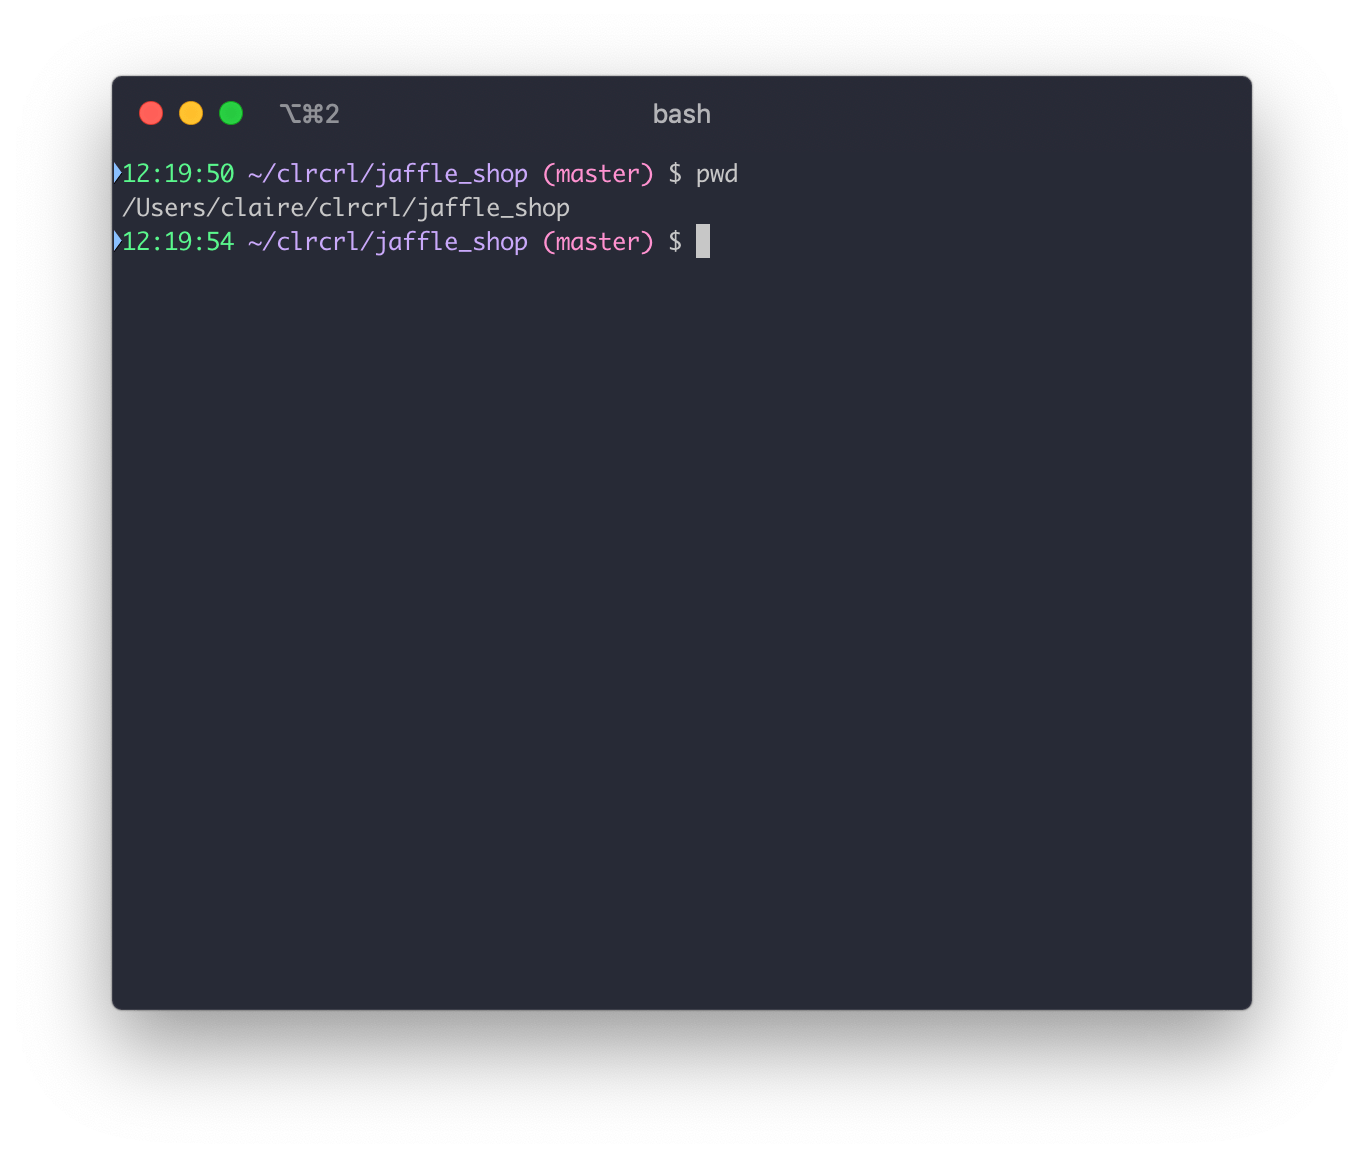 Use `pwd` to ensure that your terminal's working directory is your dbt project.